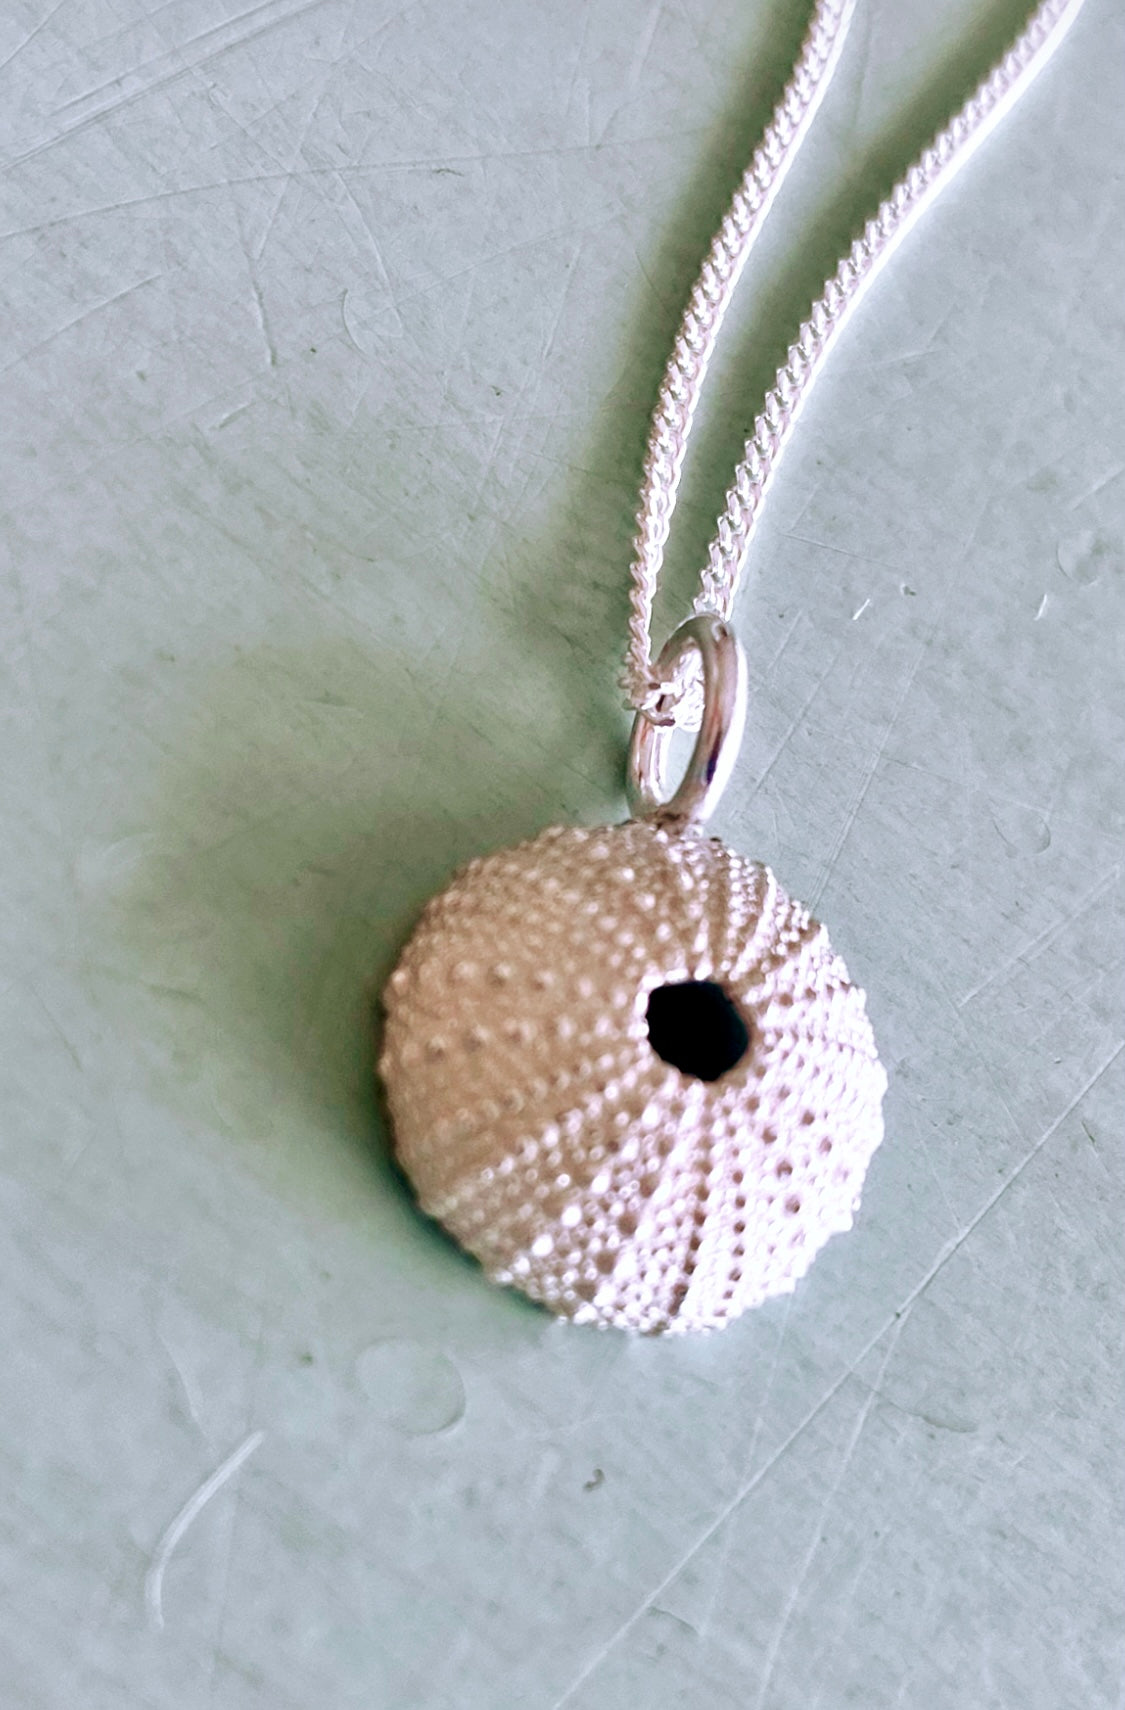 Close-up of a small sterling silver sea urchin pendant with a finely crafted chain link, highlighting its detailed texture.